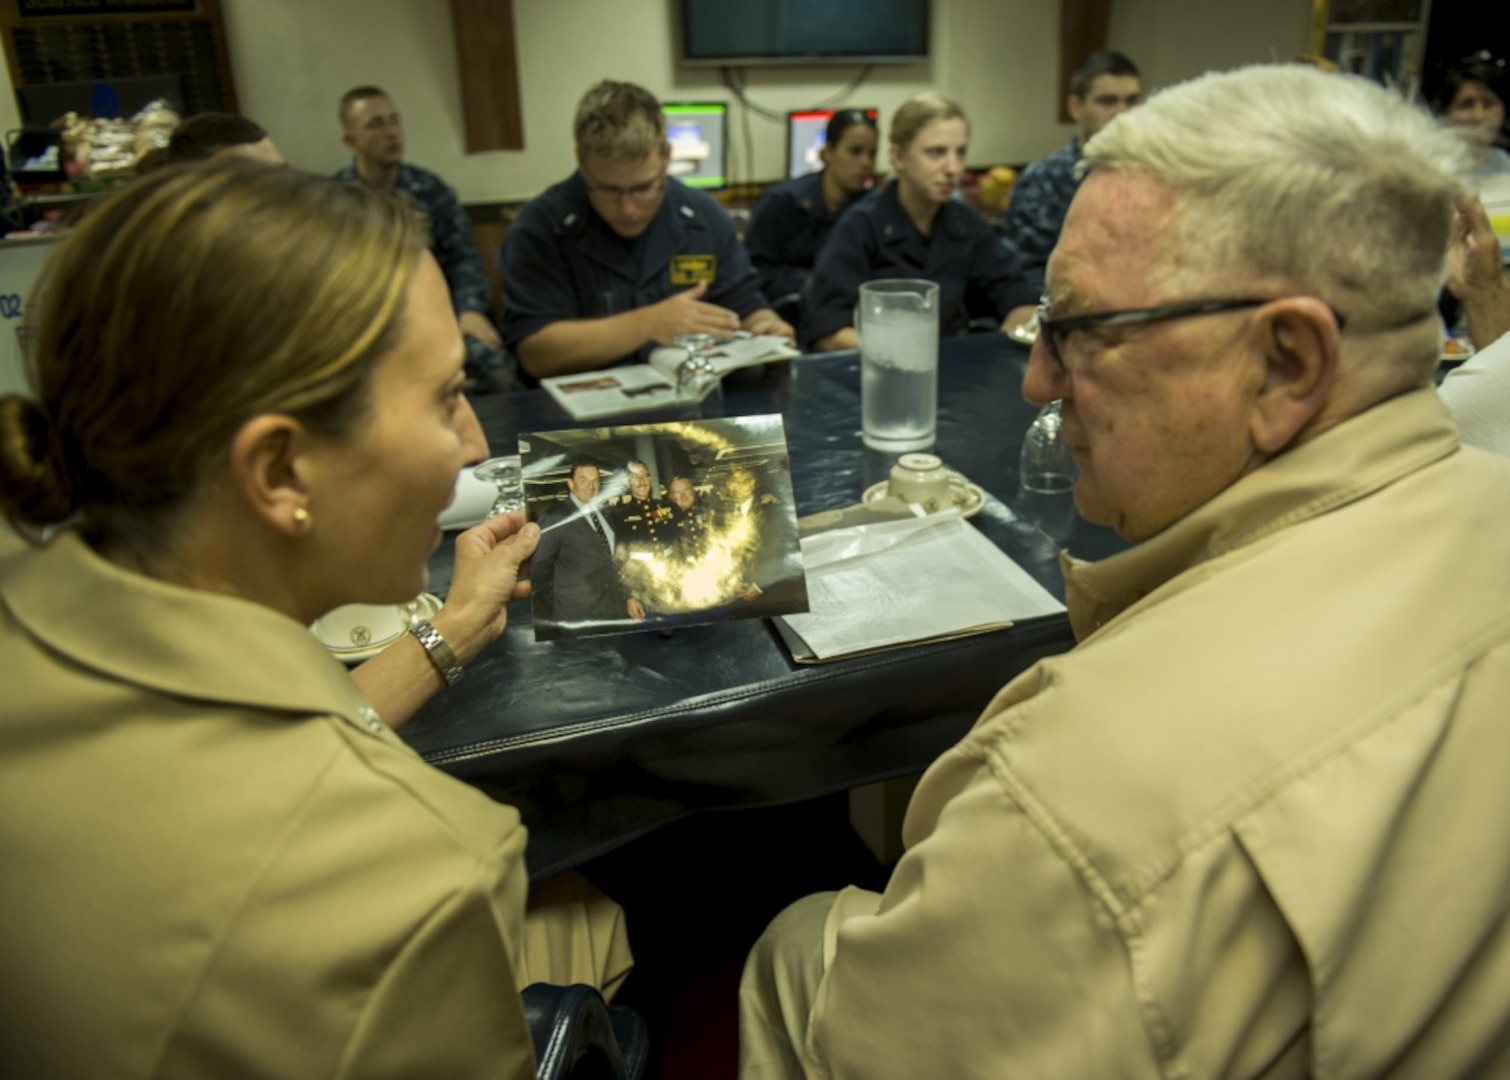 160617-N-IK388-012 SAN DIEGO (June 17, 2016) " Cmdr. Amy McInnis, left, commanding officer of guided-missile destroyer USS Howard (DDG 83), and Dan Mulvihill, a Vietnam War Battle of Hill 488 survivor, shared a photo of 1st Sgt. Jimmie E. Howard, the ship™s namesake and a Medal of Honor recipient during a ship tour. Howard hosted the tour to recognize the 50th anniversary of the June 15, 1966 battle. (U.S. Navy photo by Mass Communication Specialist 2nd Class Stacy M. Atkins Ricks/Released)